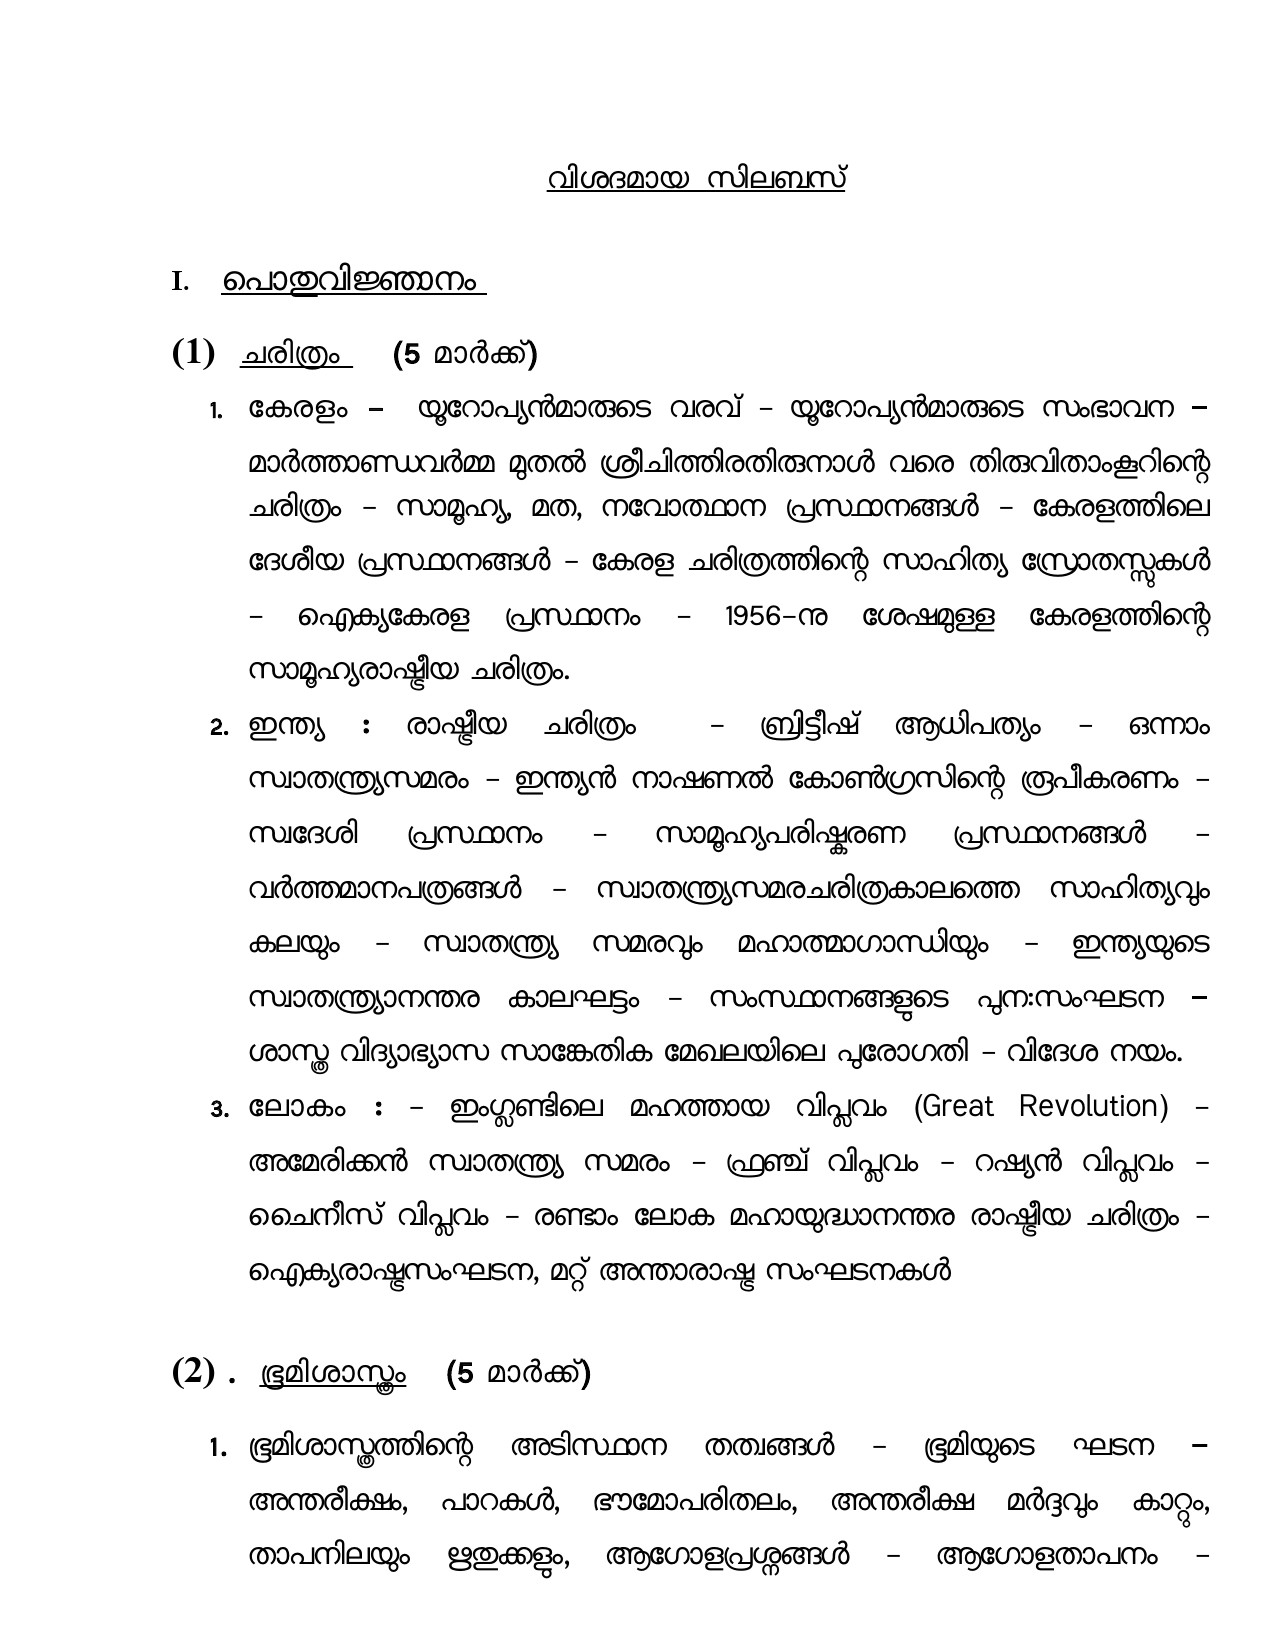 Syllabus For 2023 OMR Examination Of Civil Police Officer - Notification Image 2